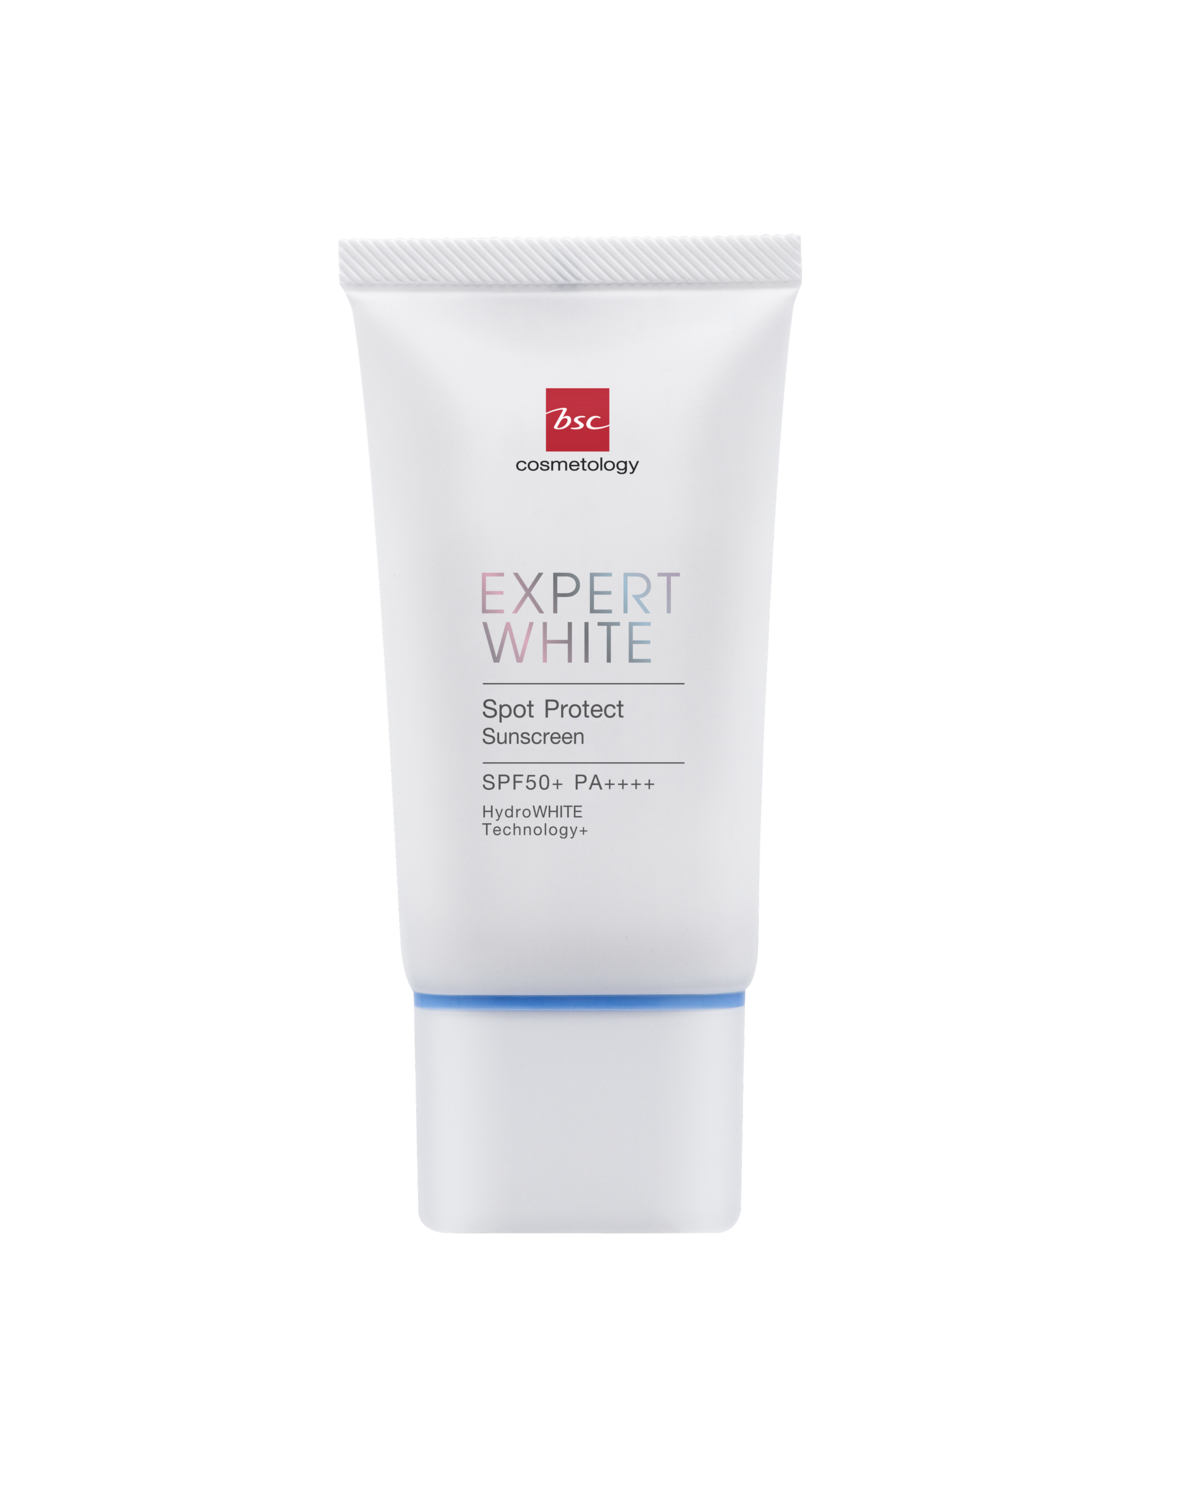 BSC EXPERT WHITE SPOT PROTECT SUNSCREEN SPF50+ PA++++